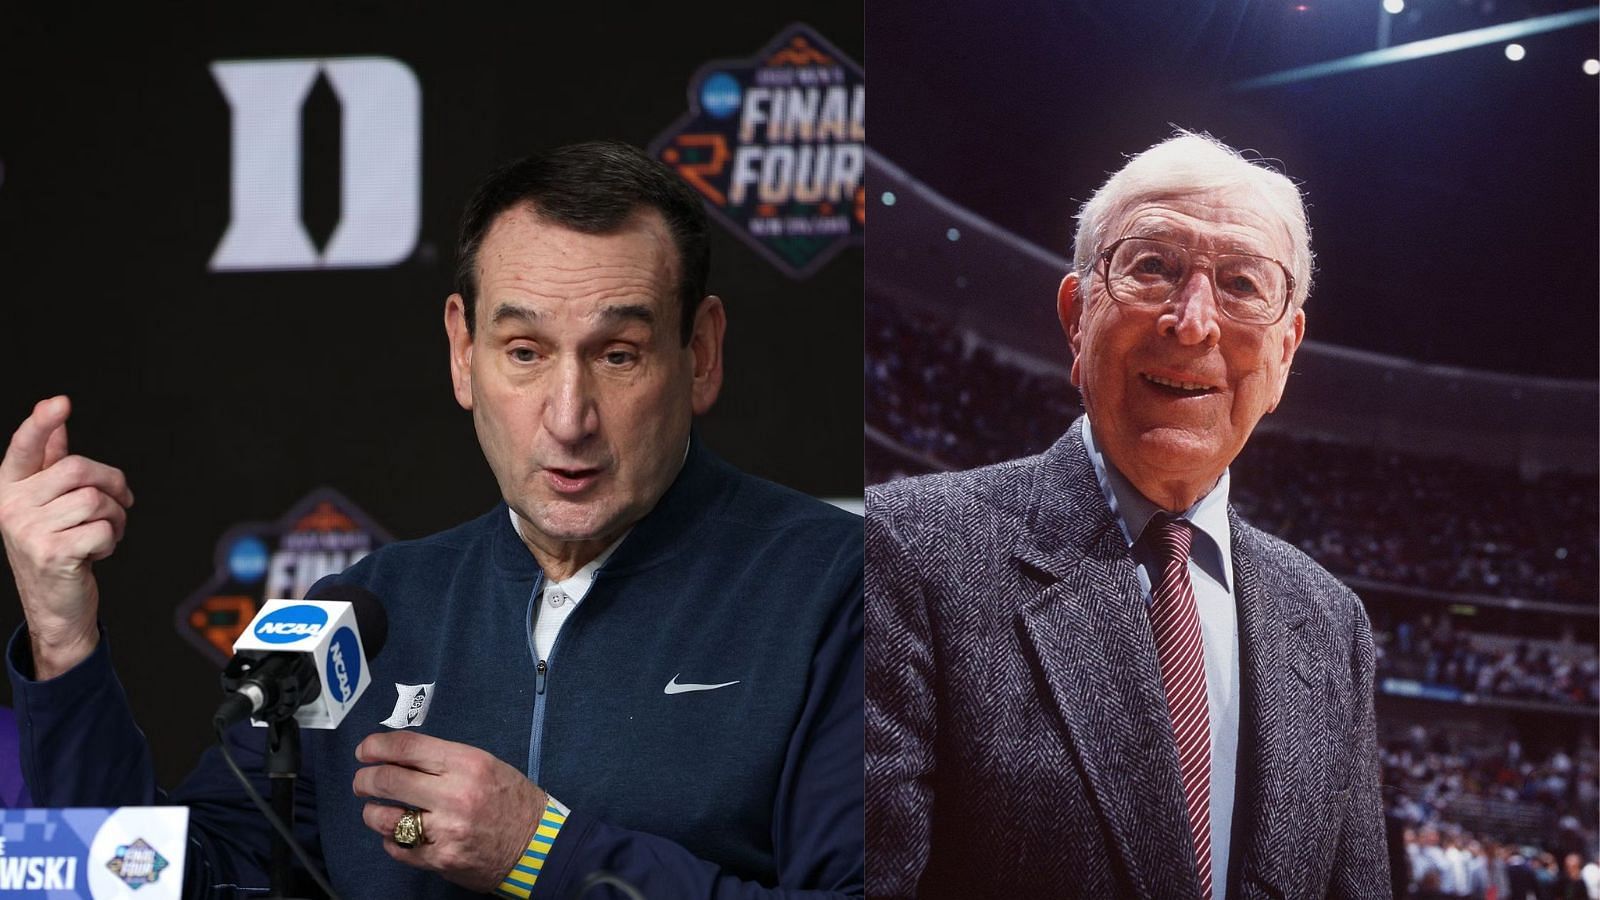 Coaches Mike Krzyzewski (left) and John Wooden (right) are the most successful college basketball coaches ever.